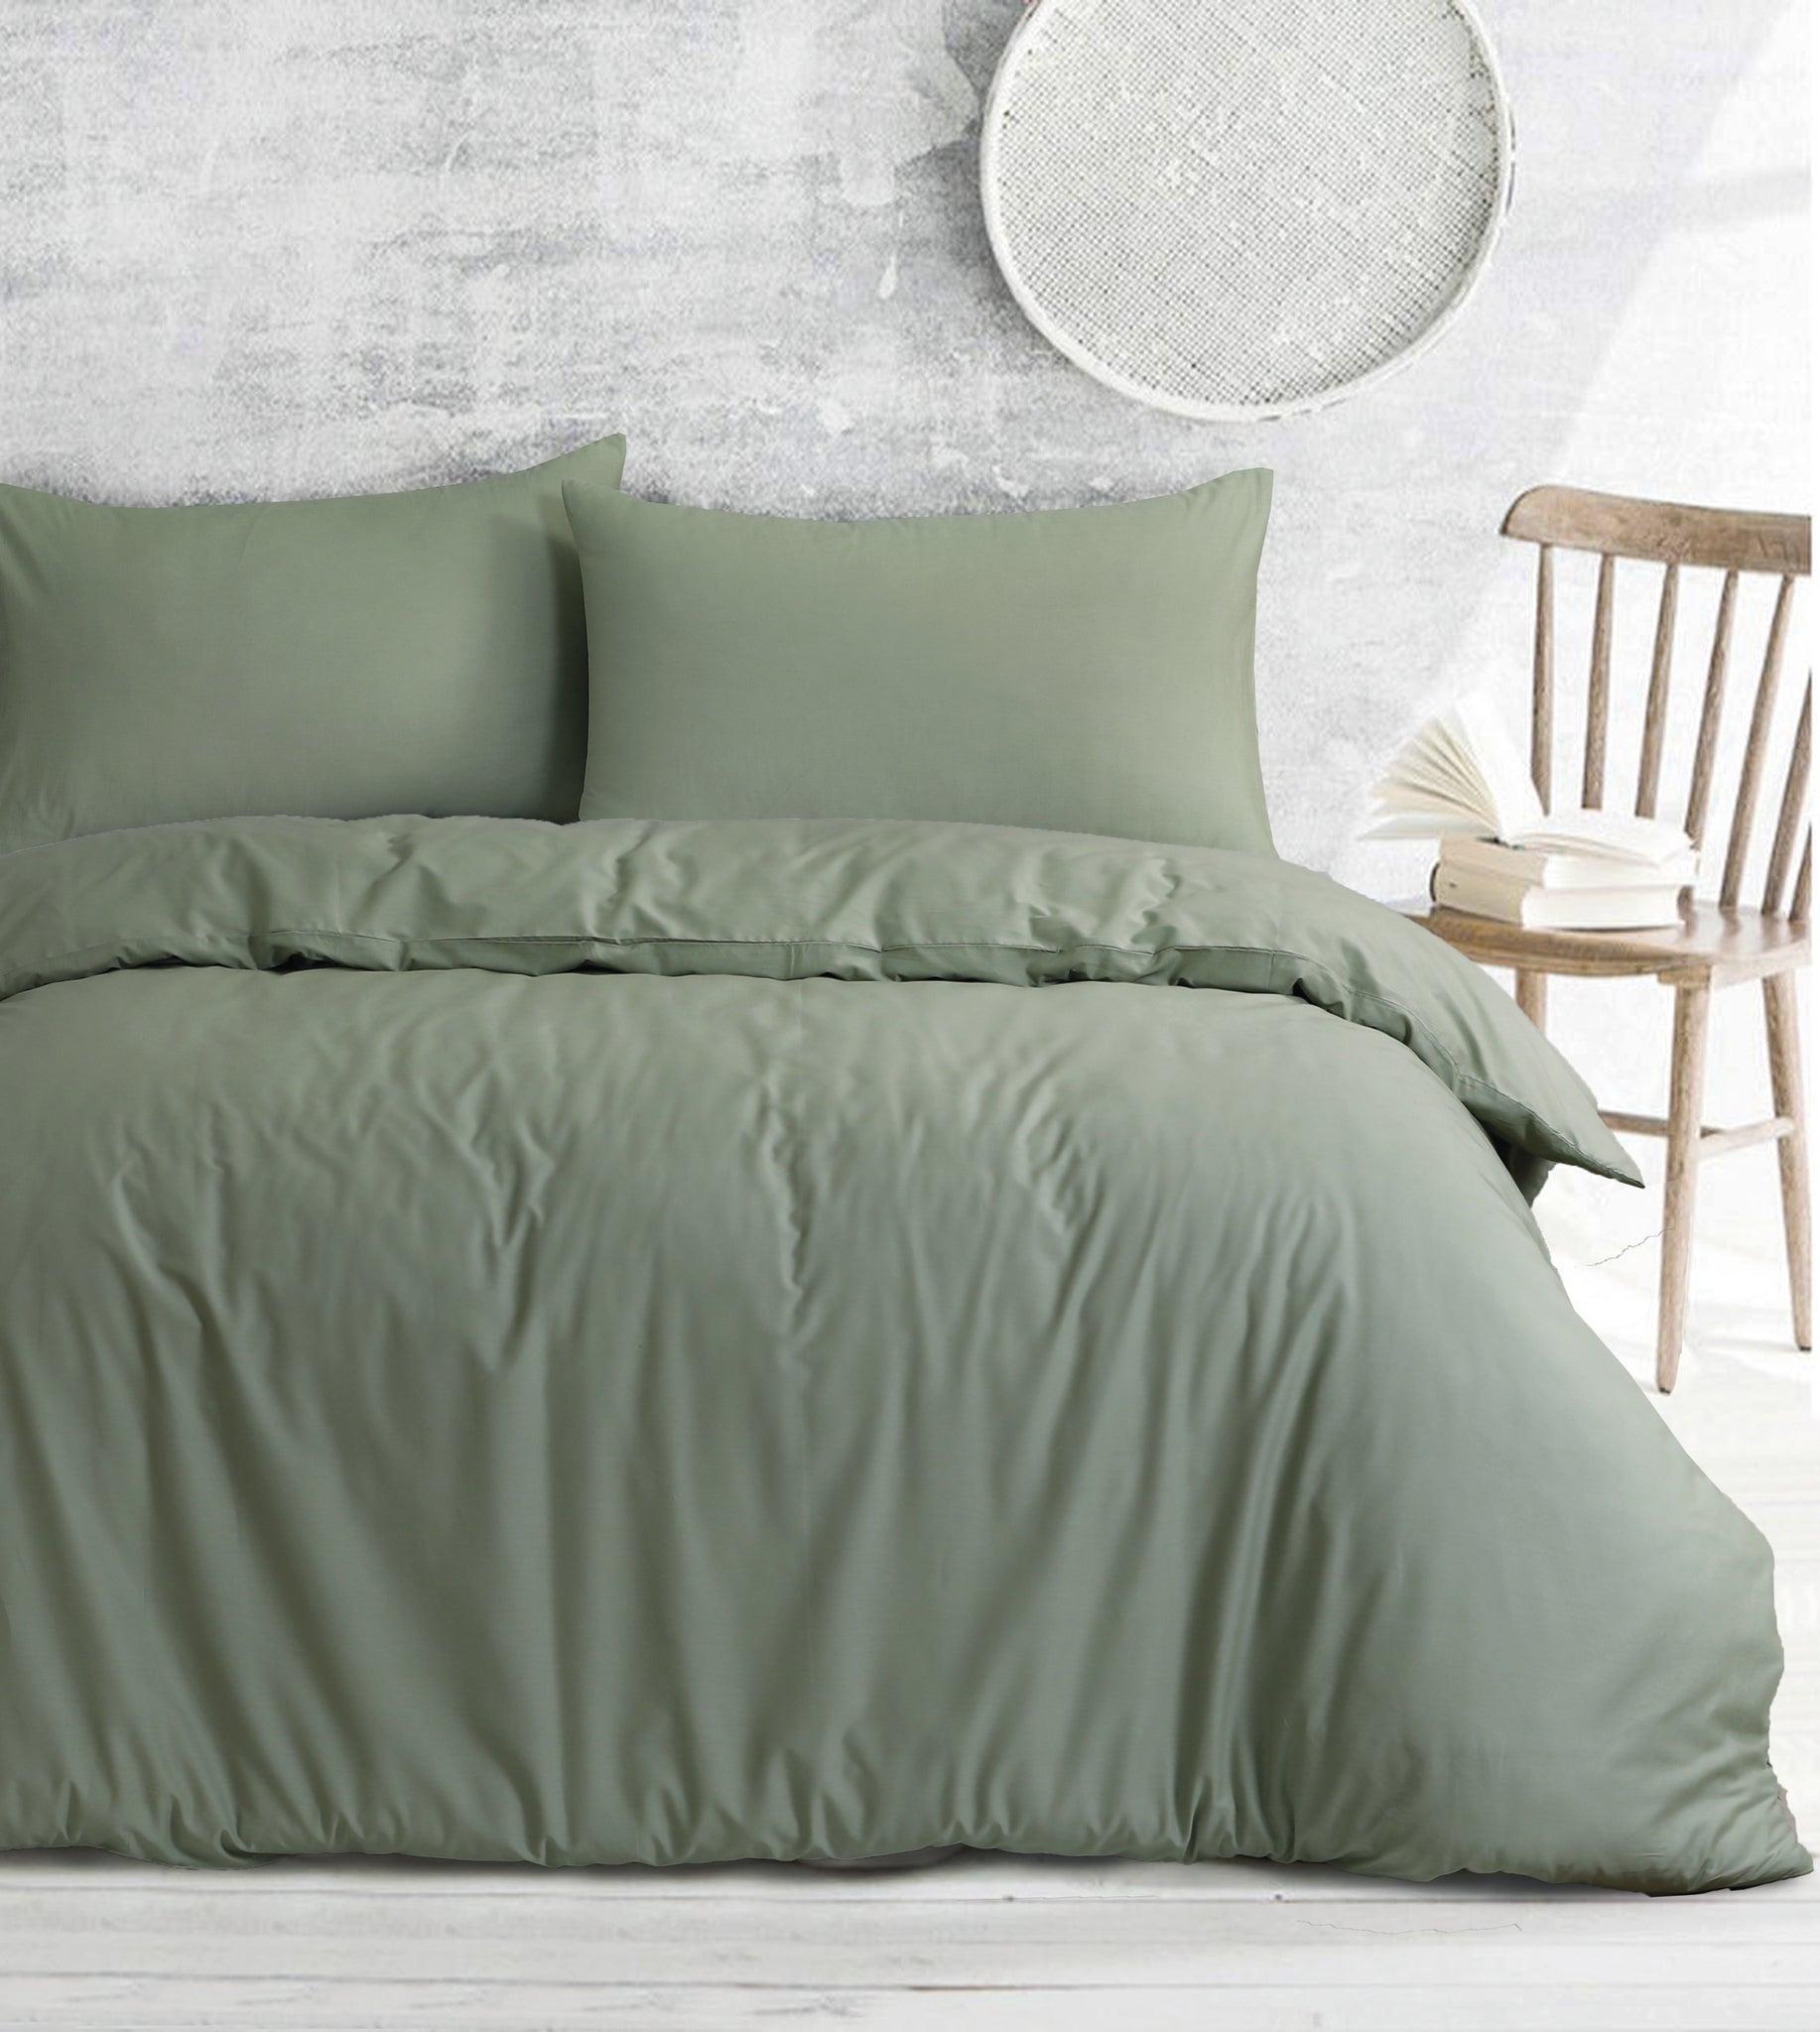 Amsons Royale Cotton Queen Quilt Duvet Doona Cover Set with Europeon pillowcases - Light Sage